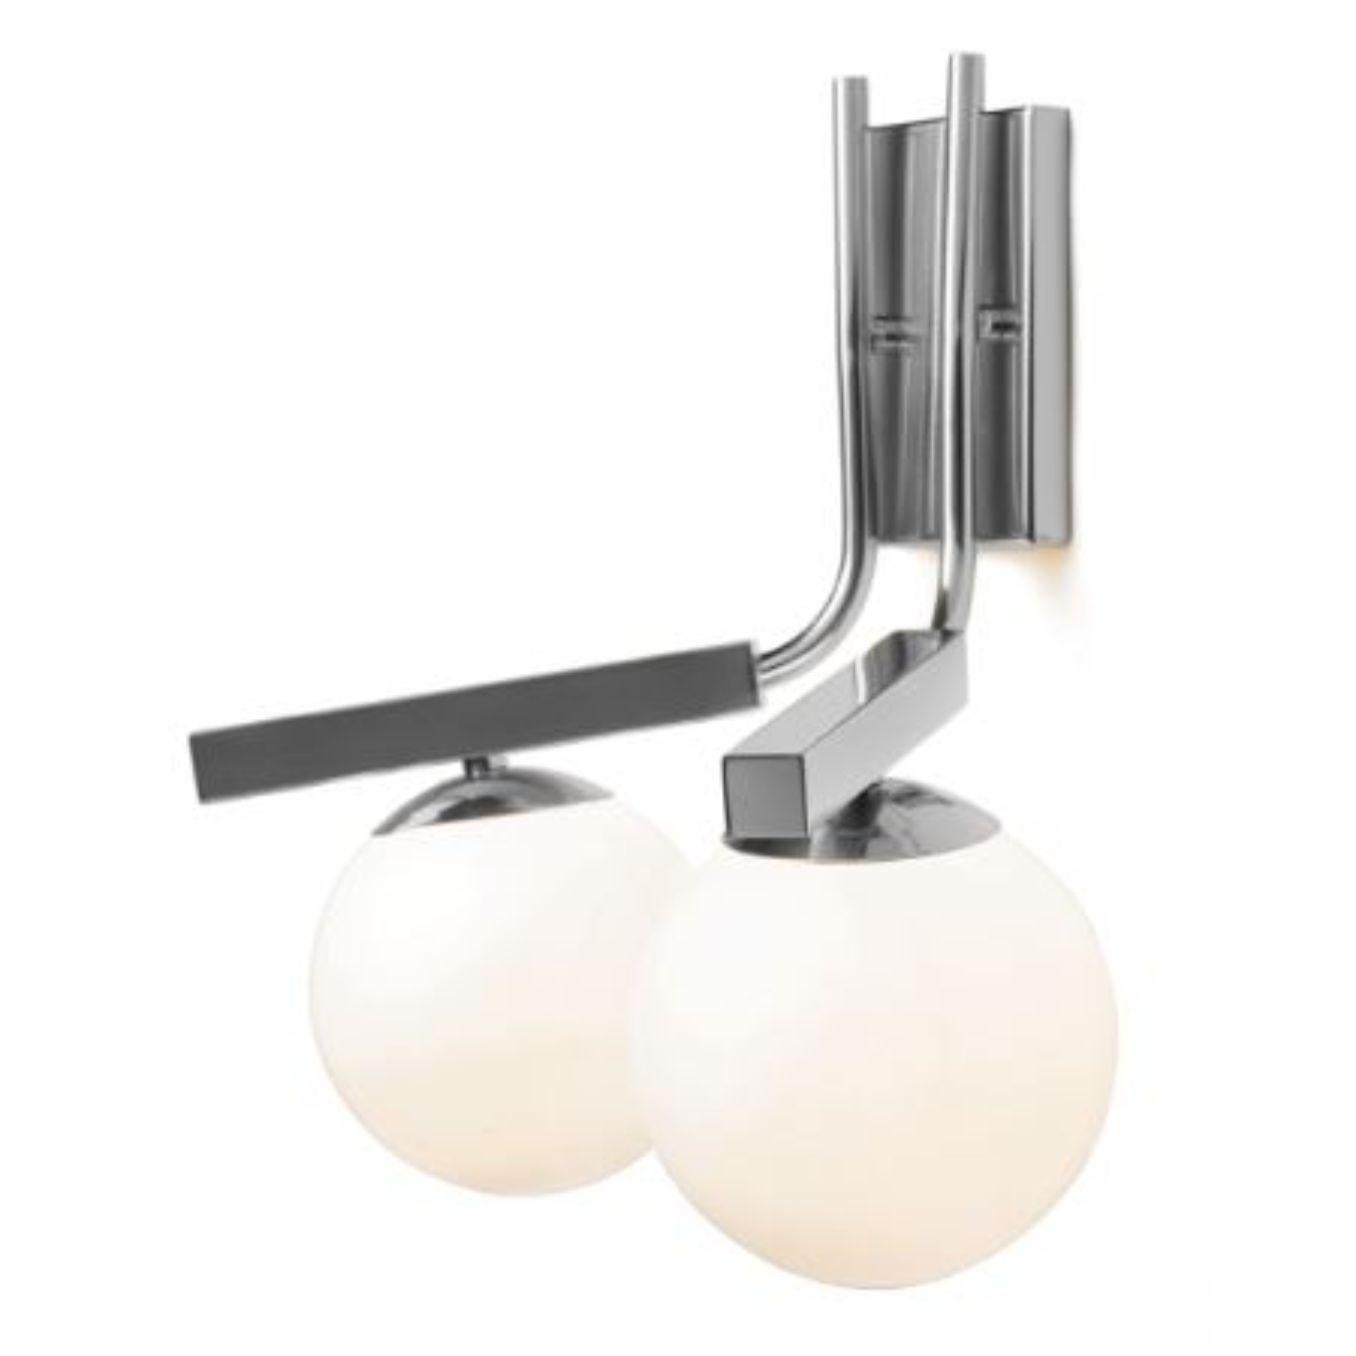 Nickel globe wall I lamp by Dooq
Dimensions: W 36 x D 33 x H 41 cm
Materials: lacquered metal, polished or brushed metal, nickel.
Also available in different colours and materials.

Information:
230V/50Hz
2 x max. G9
4W LED

120V/60Hz
2 x max. G9
4W